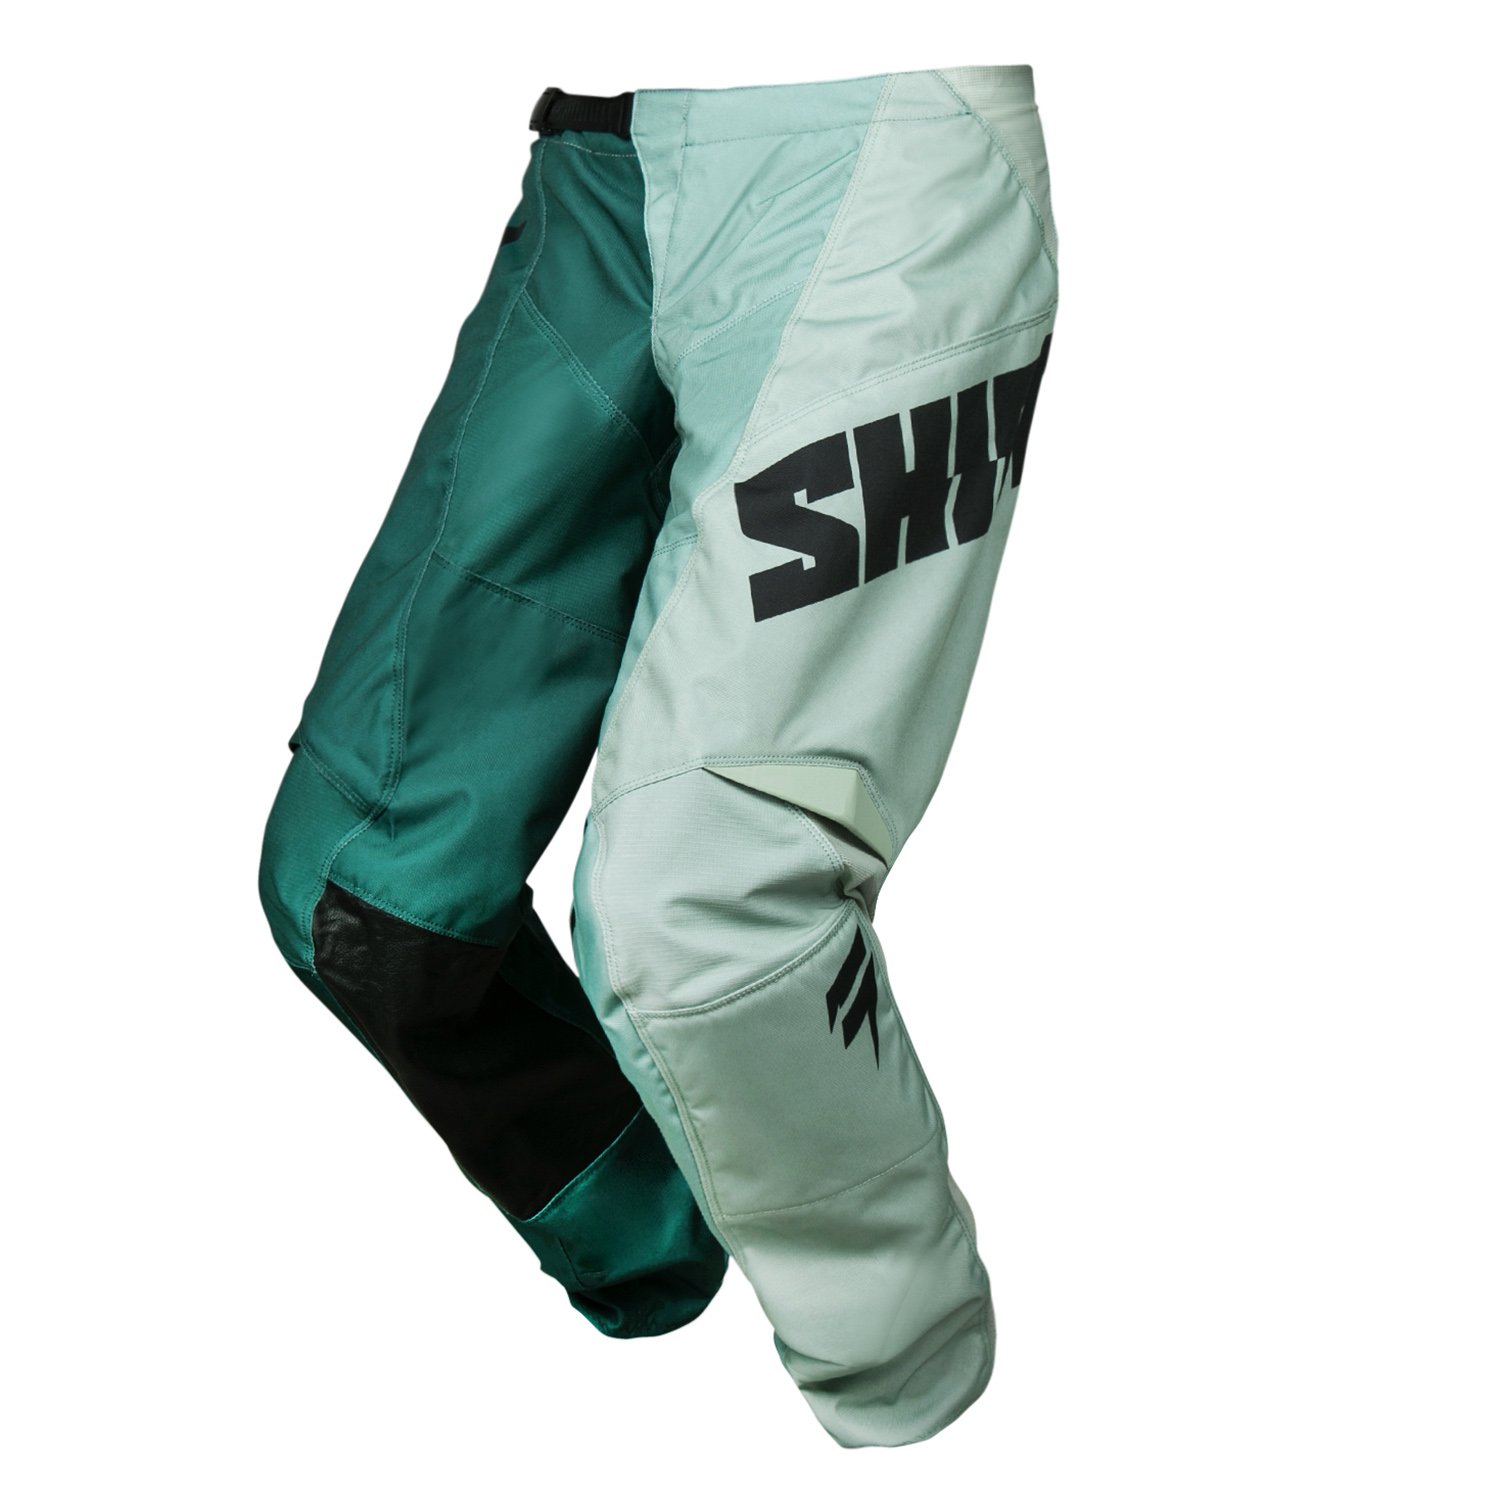 Shift Cross Hose Whit3 Label Tarmac - Teal